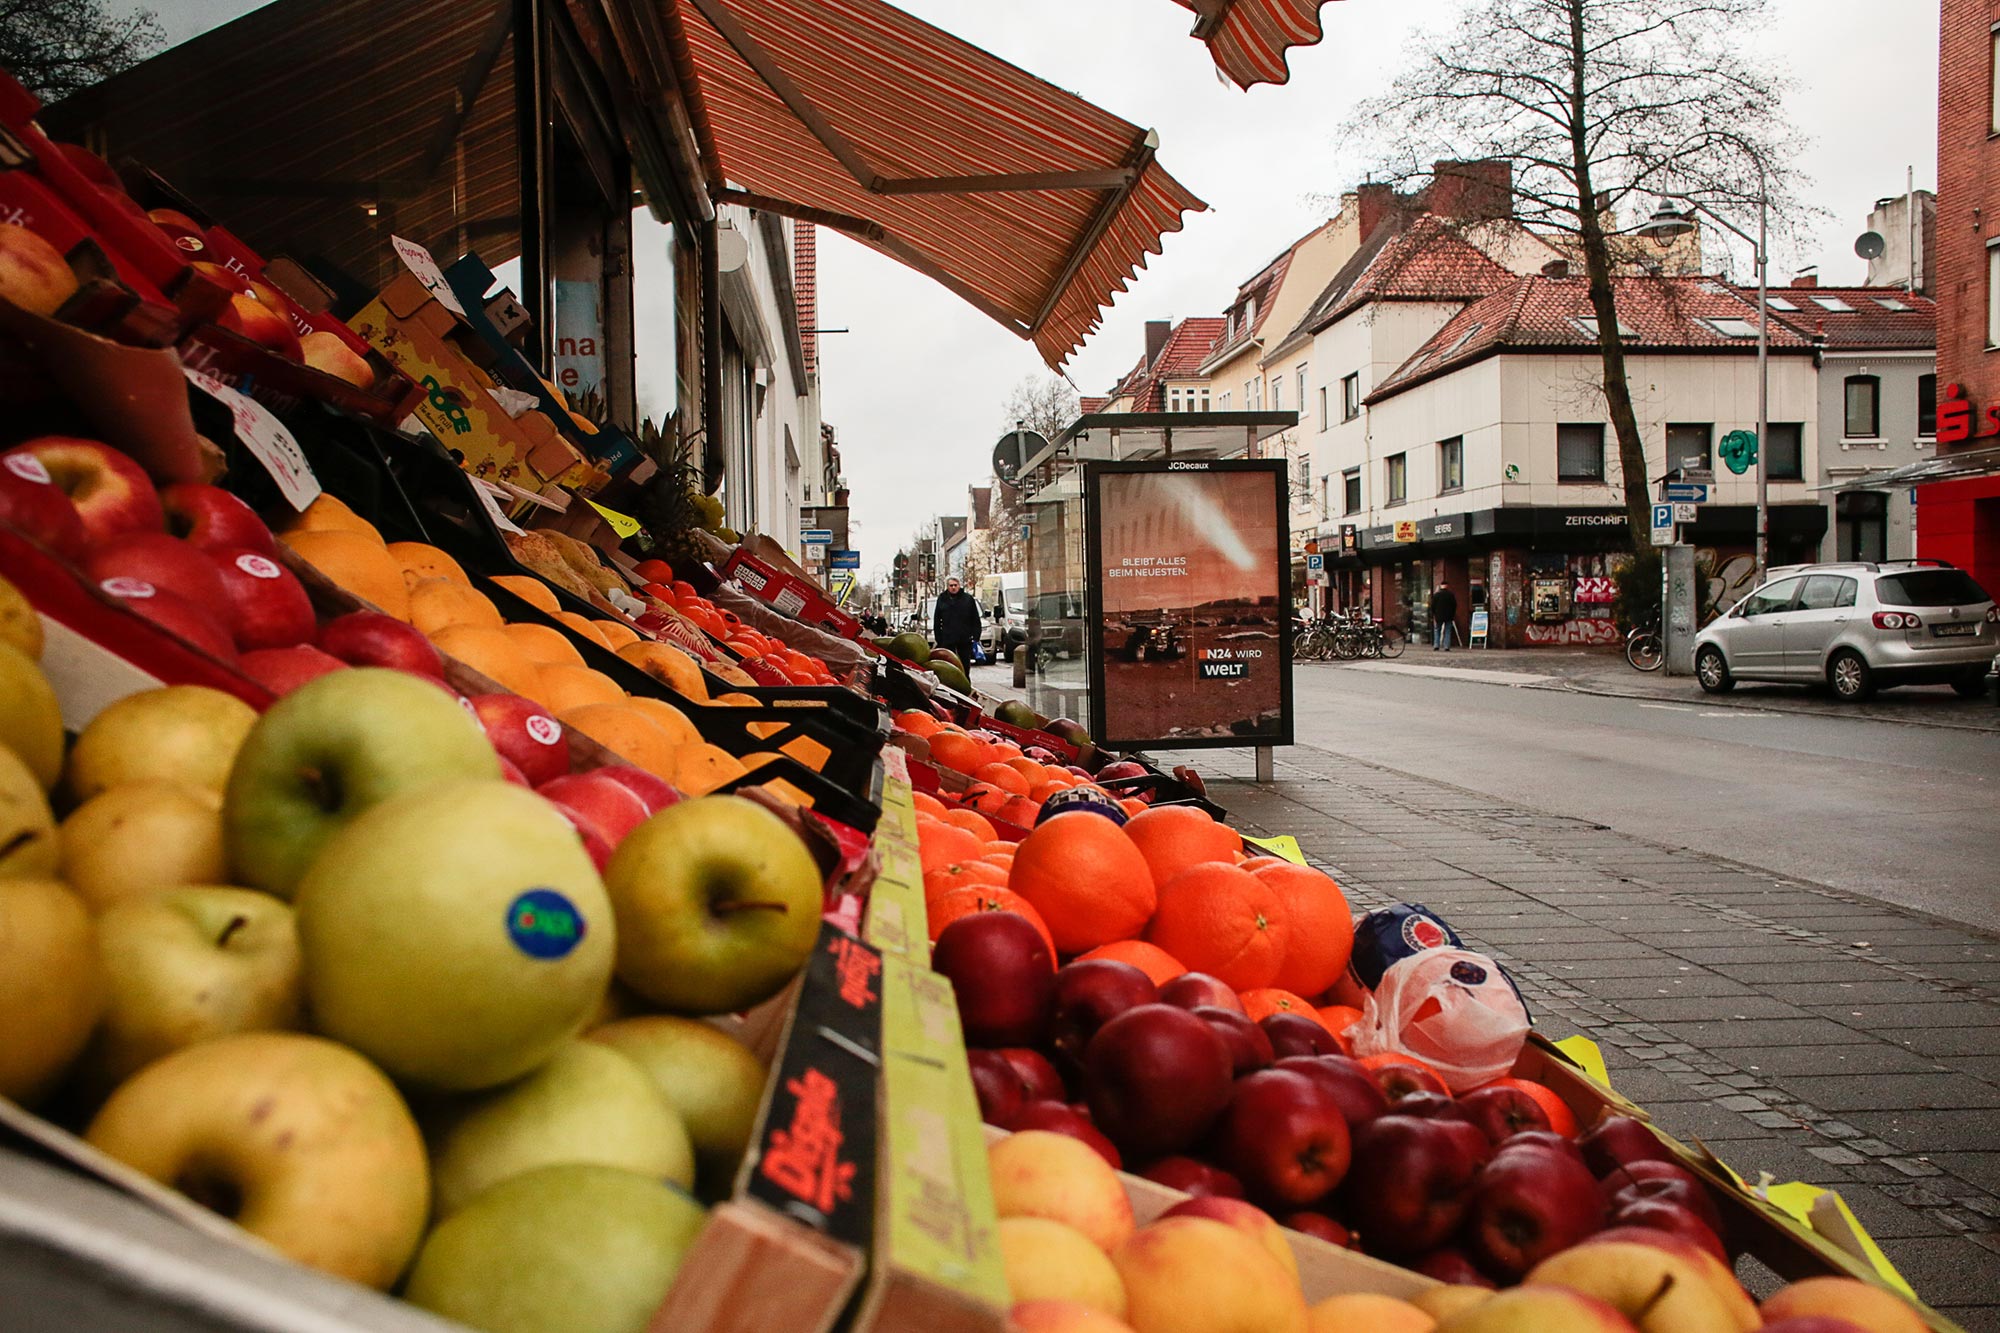 Detail of apples, oranges, pears and other fruit presented in front of a store